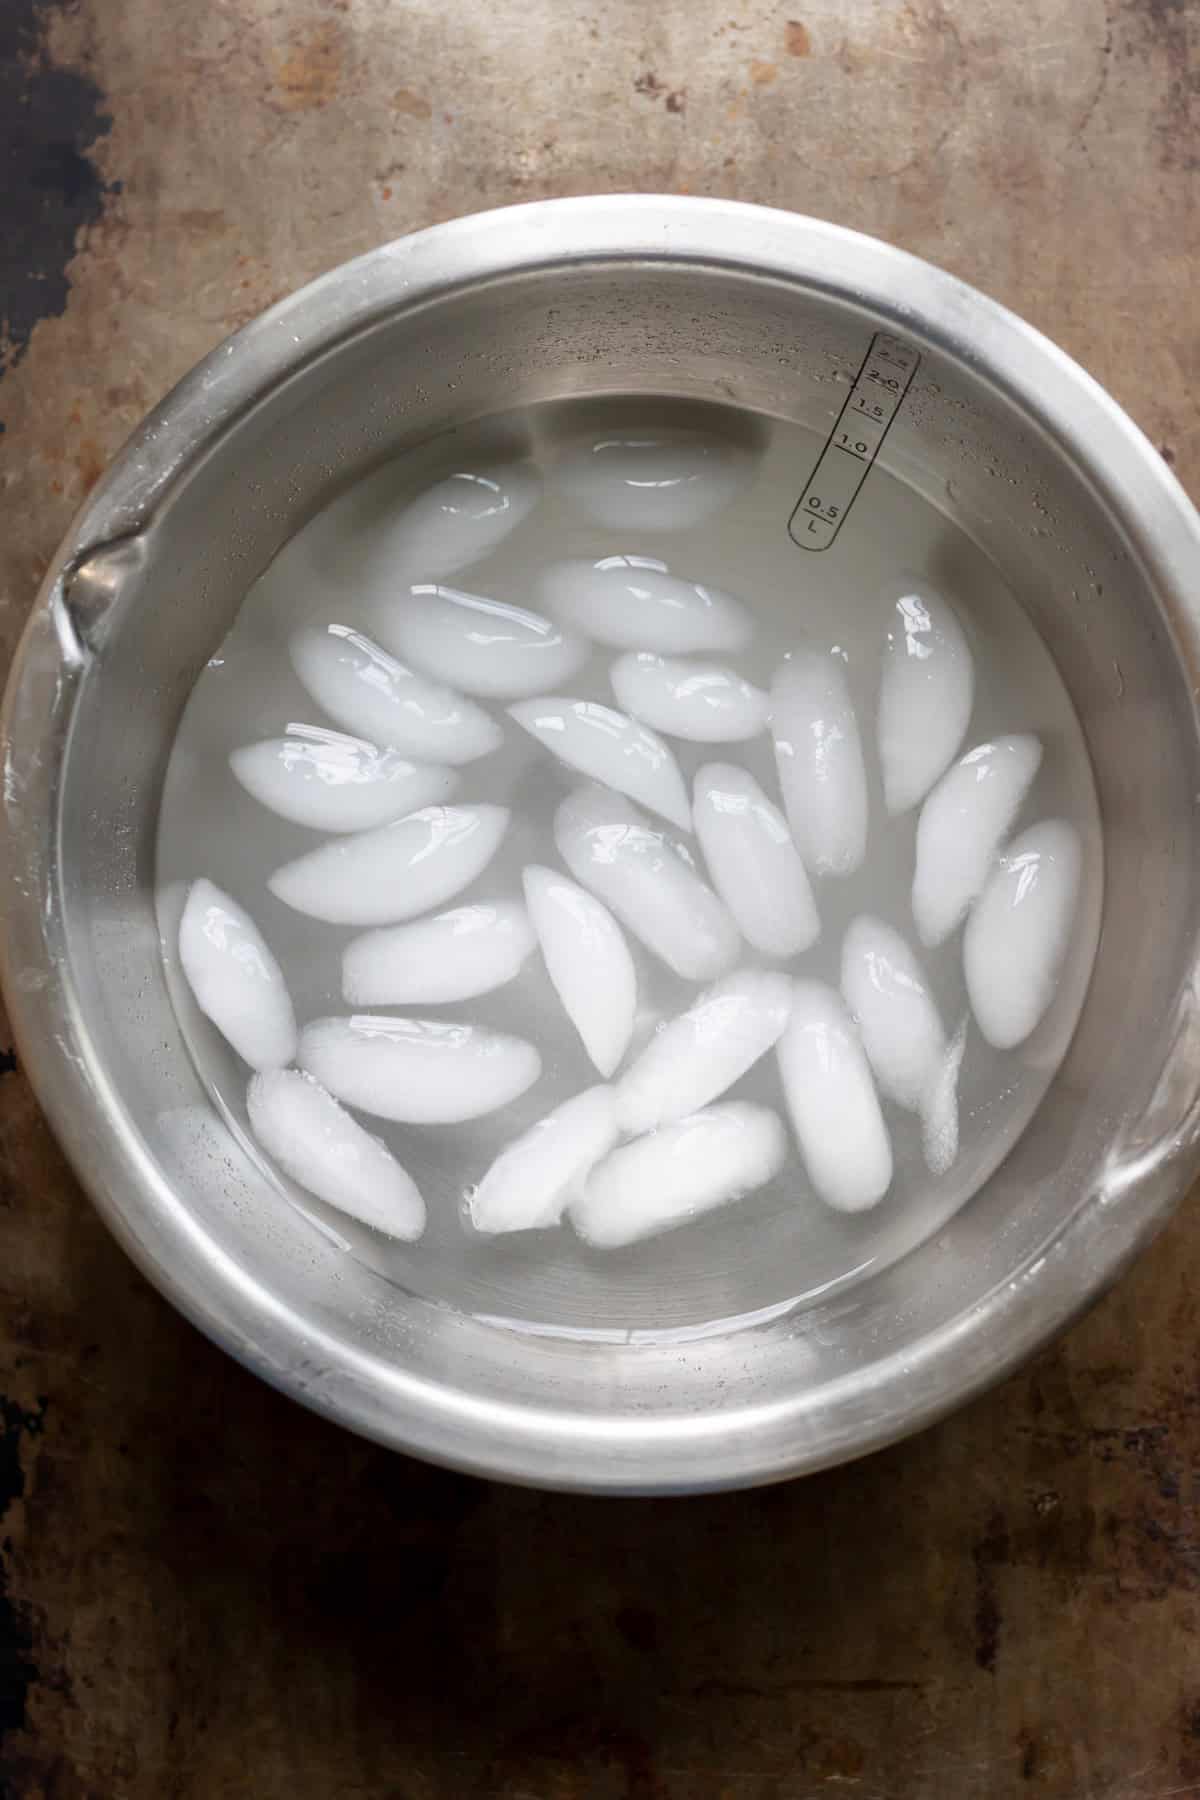 An ice bath - bowl of water with ice in it.